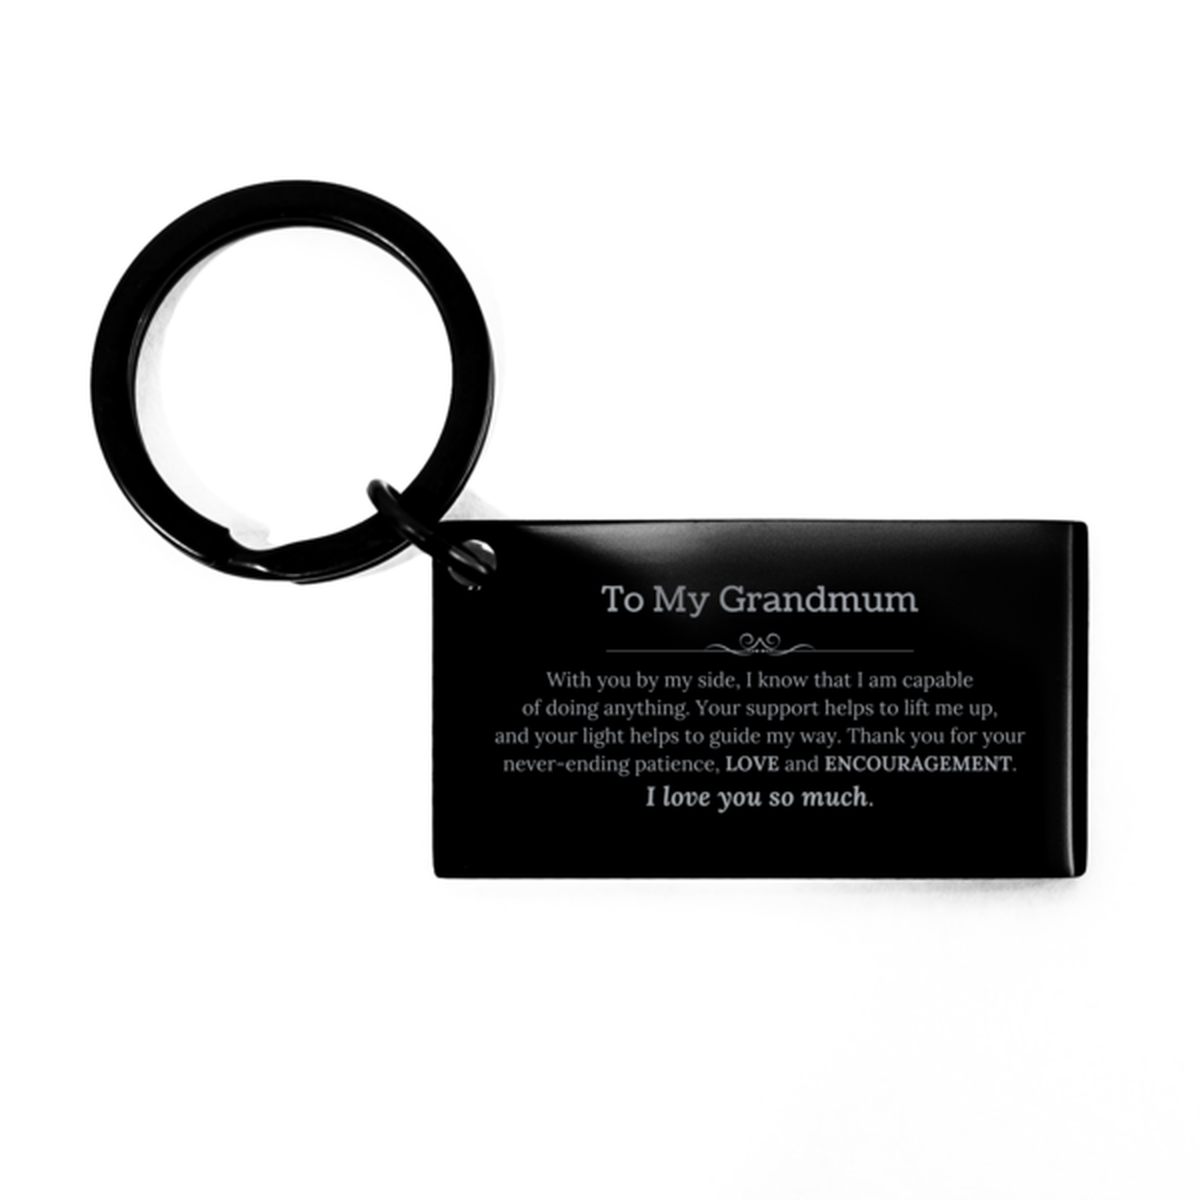 Appreciation Grandmum Keychain Gifts, To My Grandmum Birthday Christmas Wedding Keepsake Gifts for Grandmum With you by my side, I know that I am capable of doing anything. I love you so much